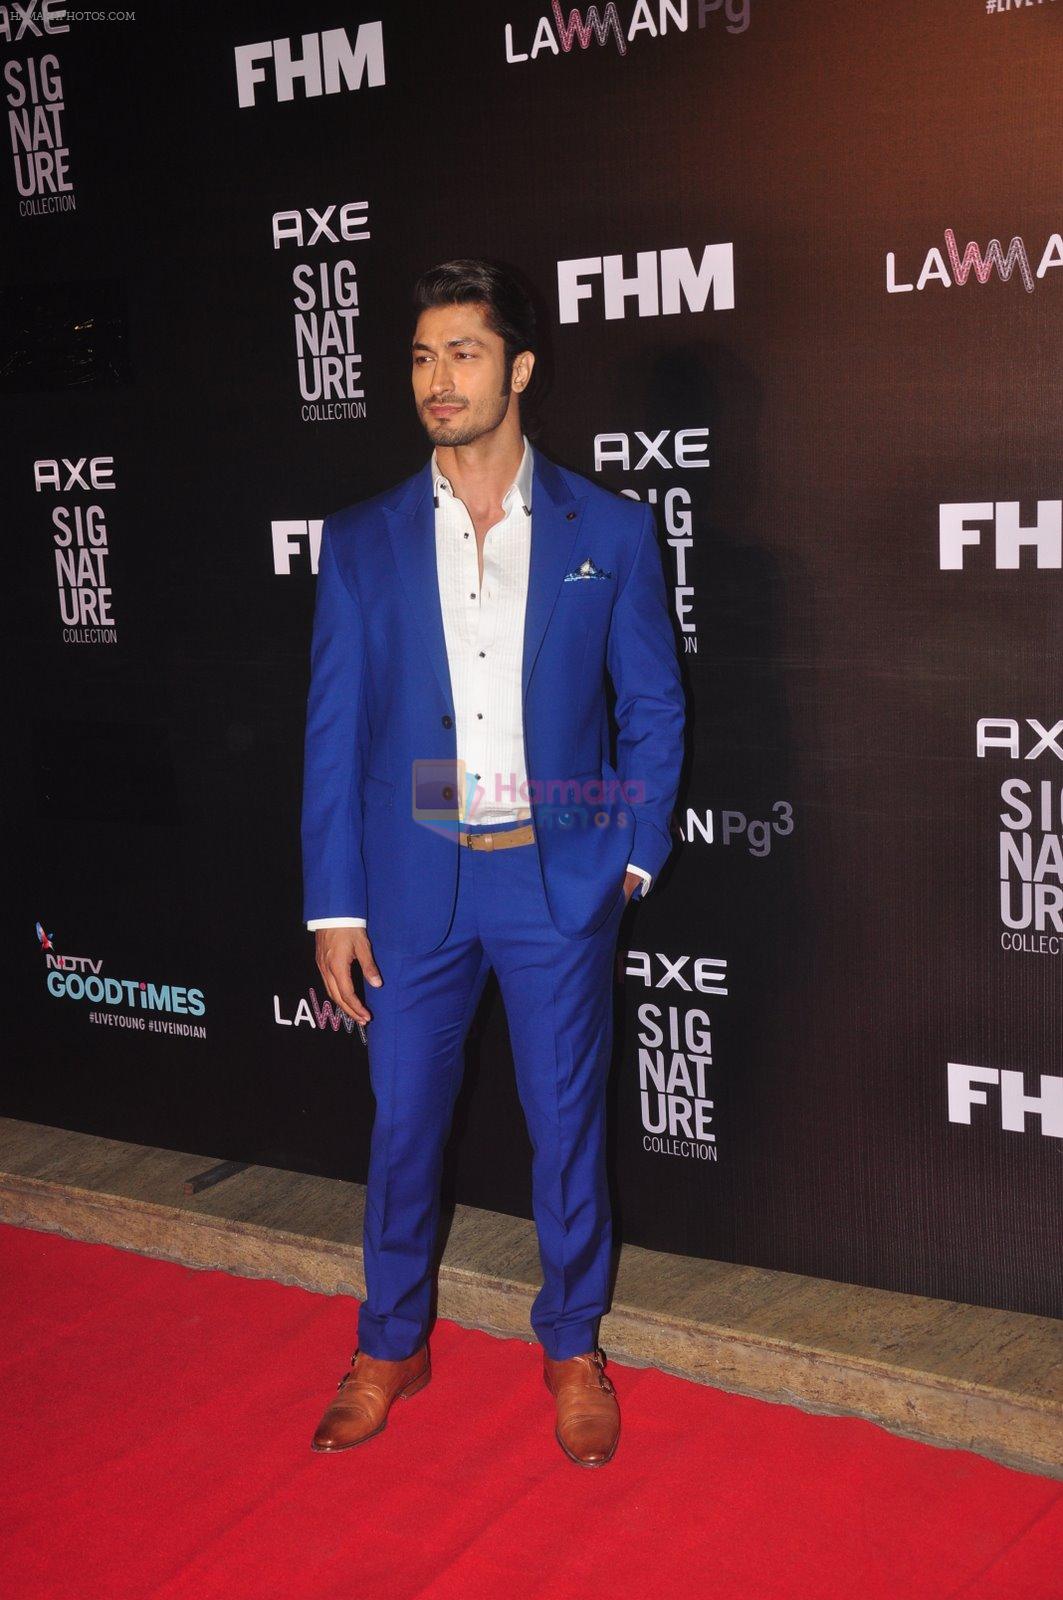 Vidyut Jamwal at Fhm bachelor of the year bash in Hard Rock Cafe on 22nd Dec 2014